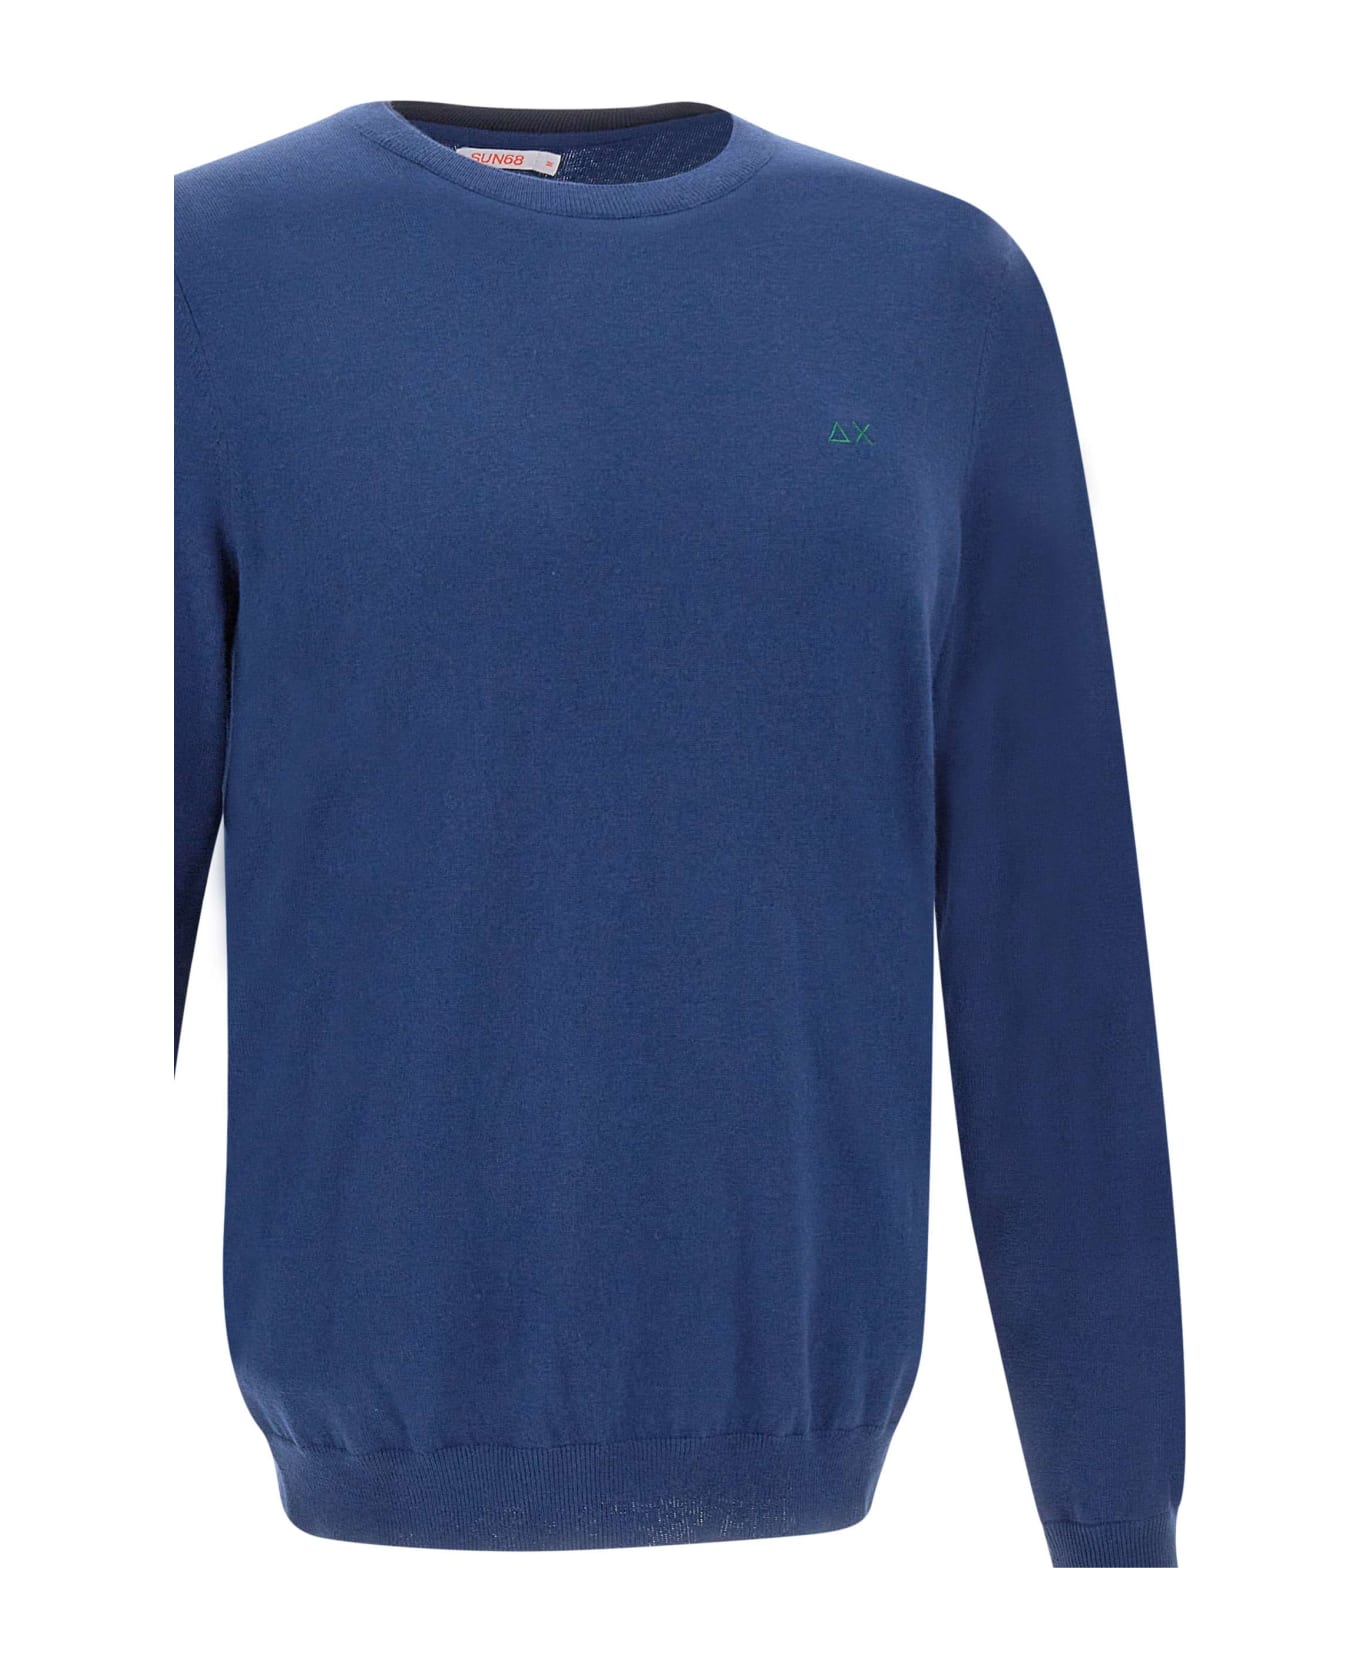 Sun 68 'round Double' Cotton And Wool Pullover Sweater - BLUE